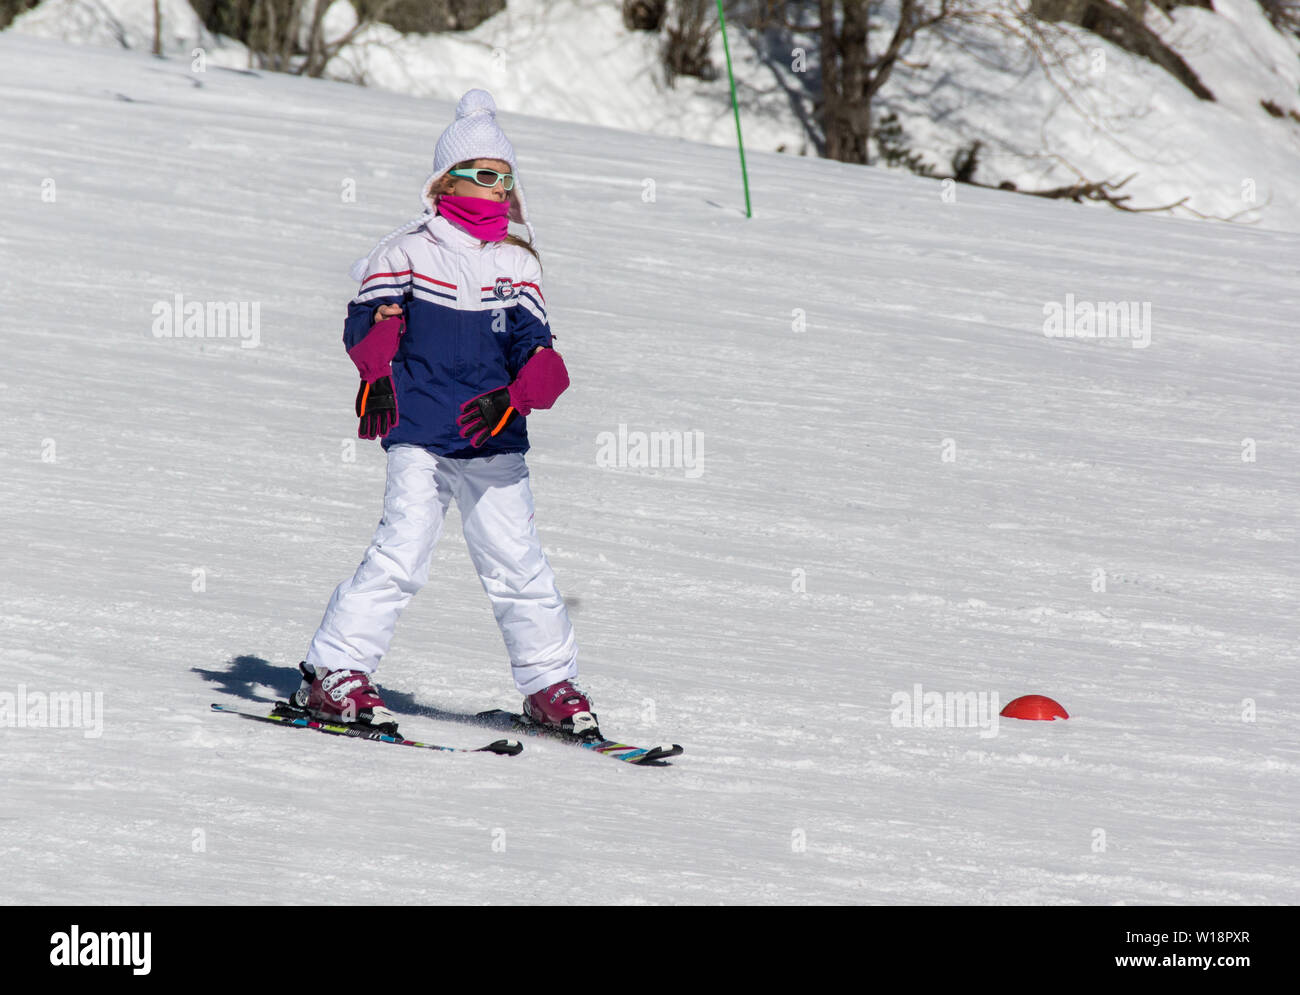 The central Pyrenees at Pont Espagne. Young girl learning to ski.No sticks. Stock Photo